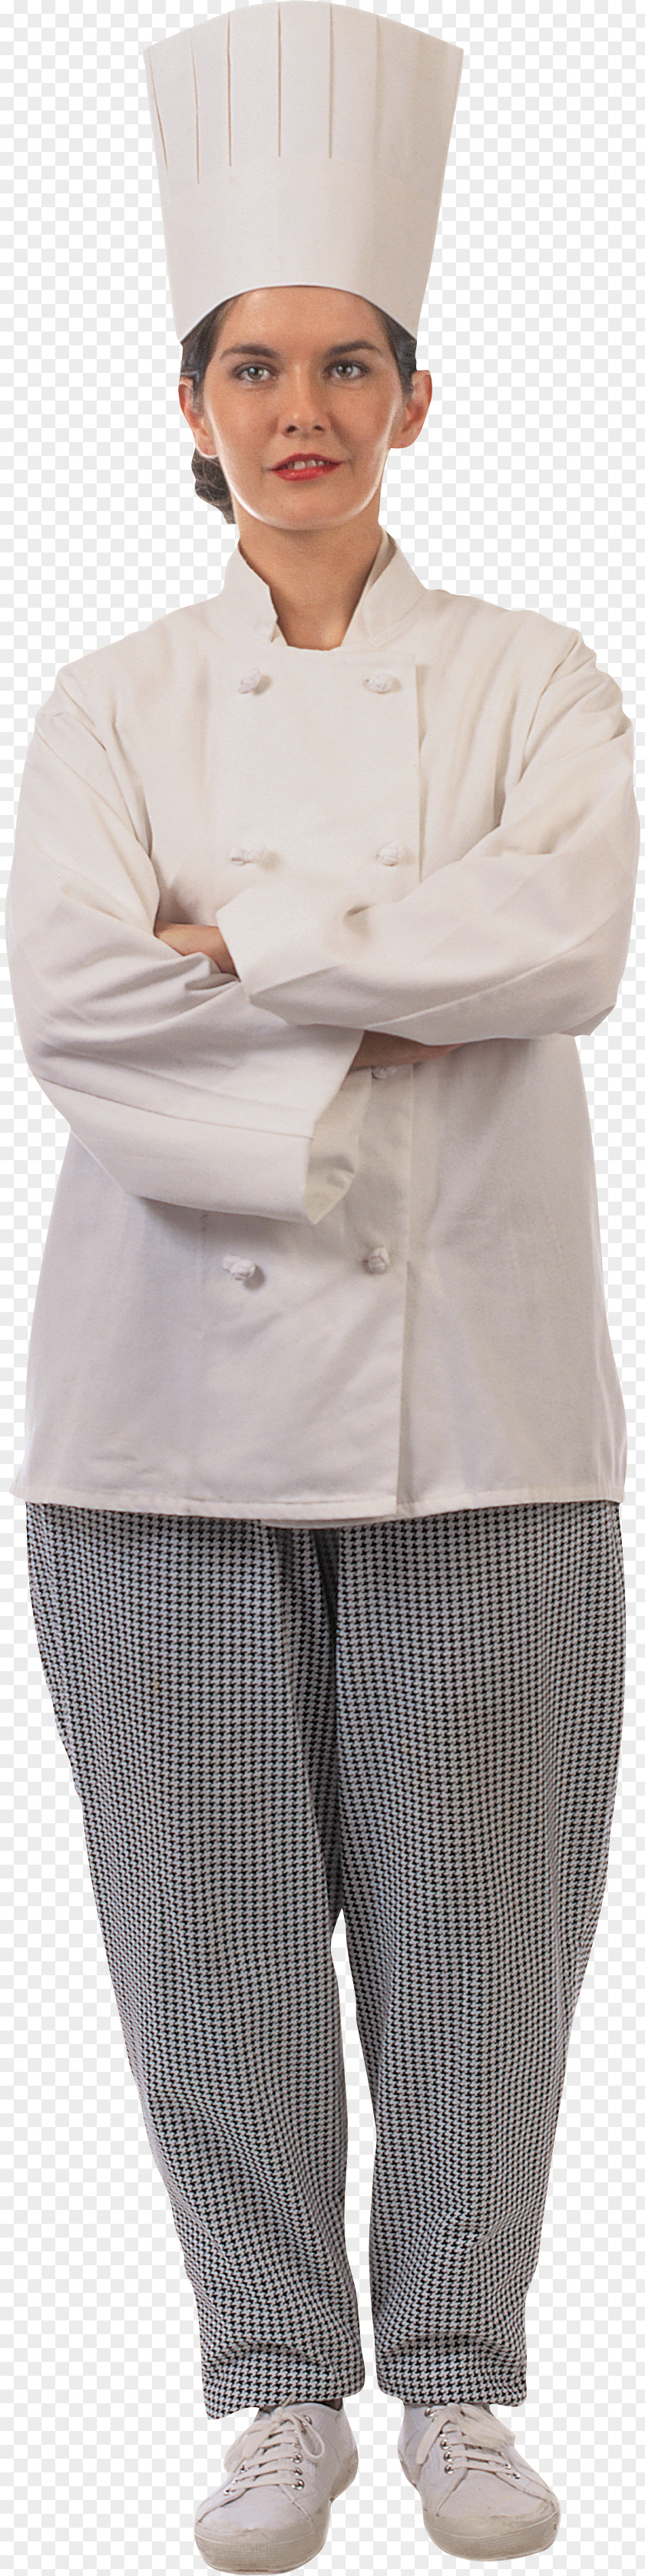 Chef's Uniform Woman Photography PNG